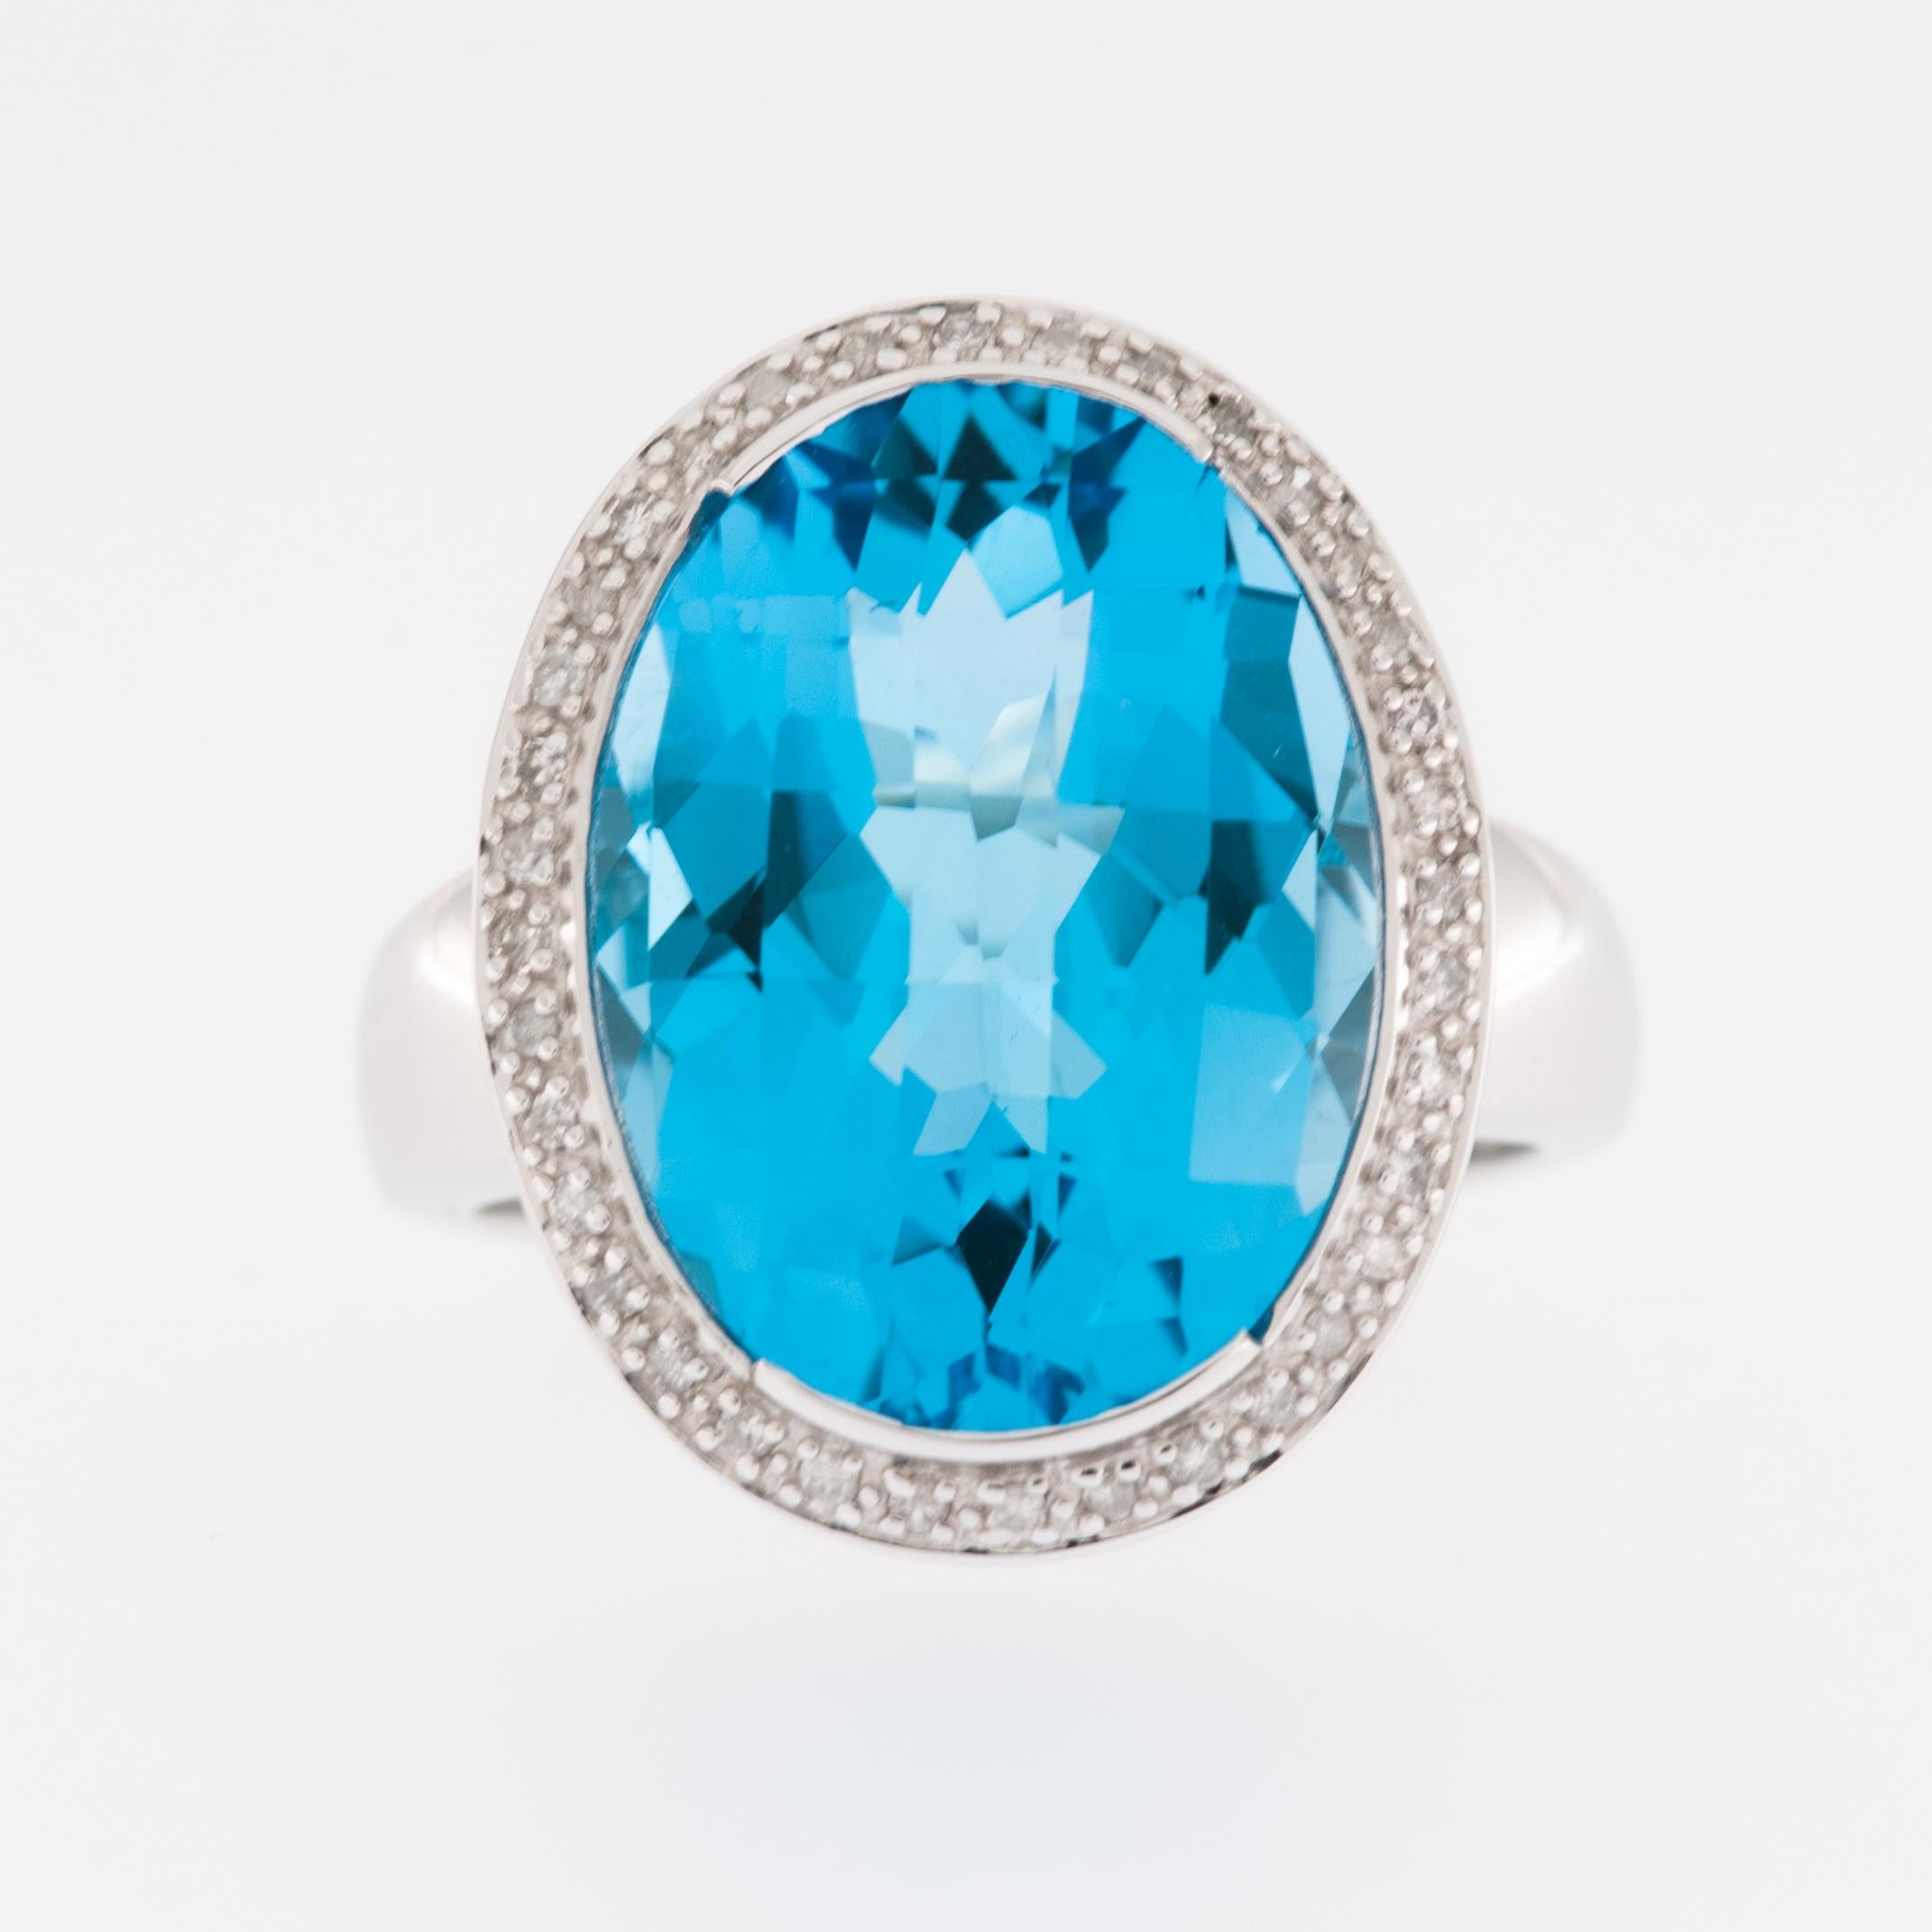 Contemporary 9 karat White Gold Ring with Blue Quartz and Diamonds In Good Condition For Sale In Esch-Sur-Alzette, LU